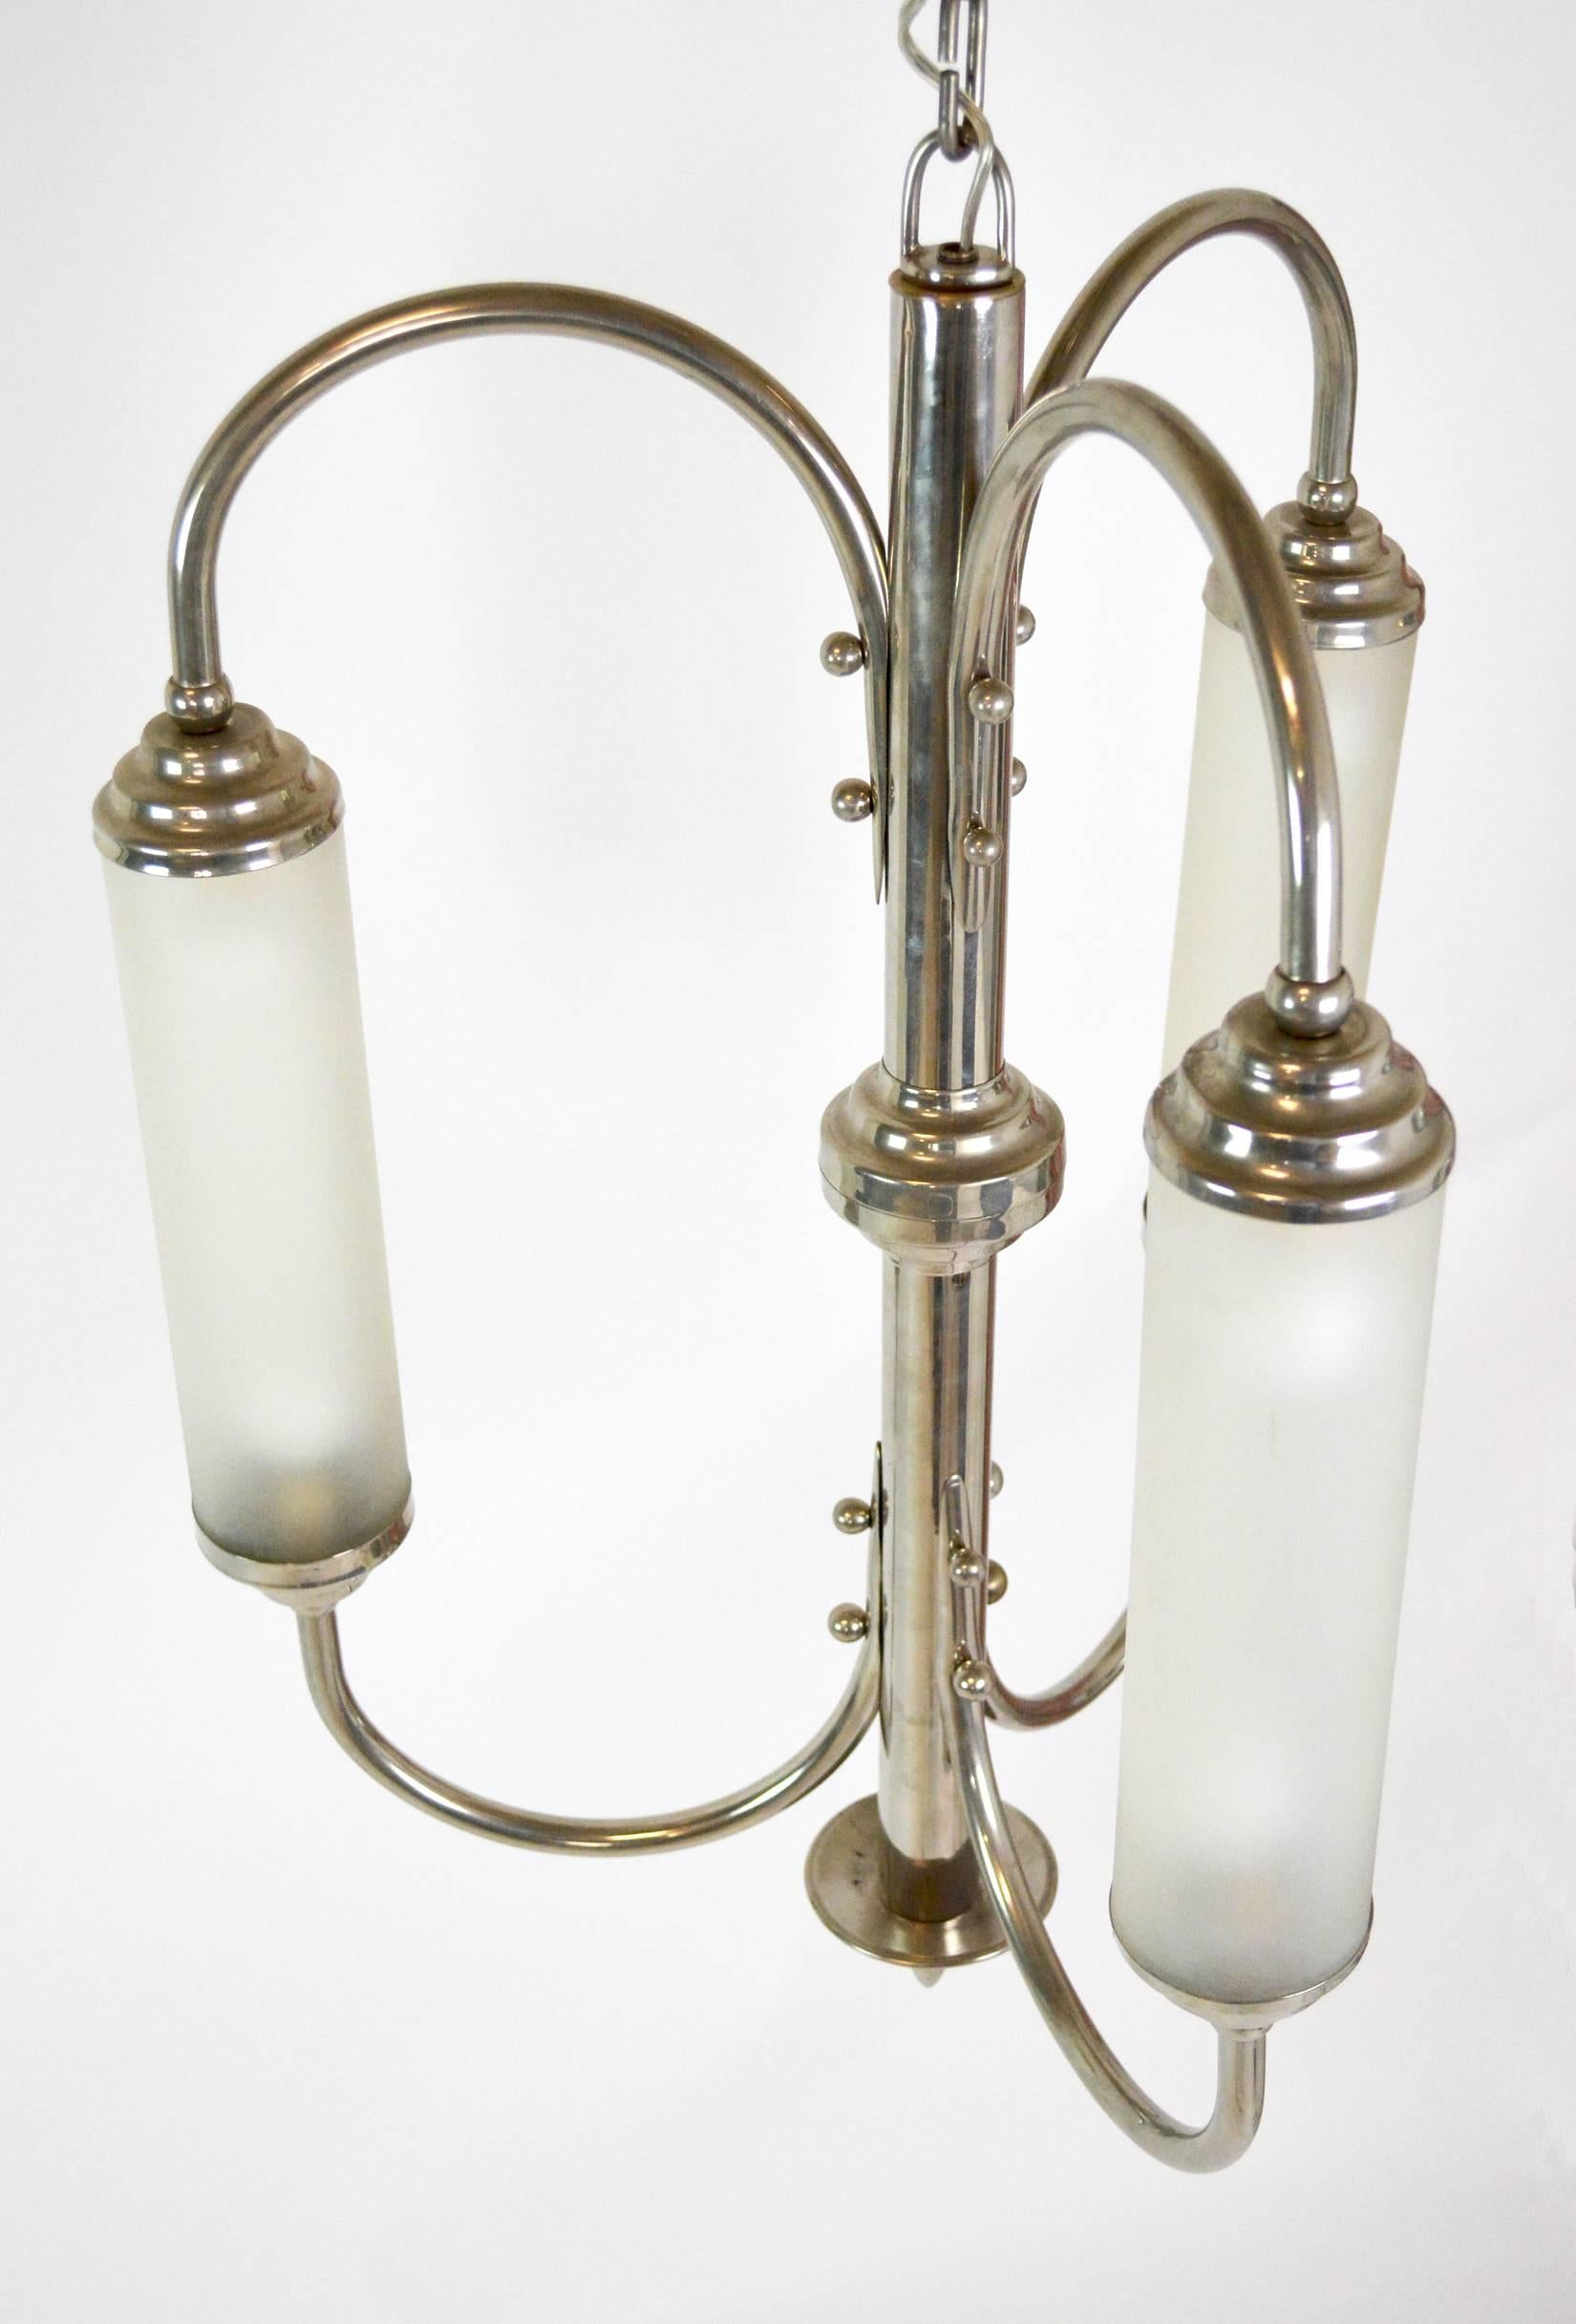 A sculptural chandelier consisting of three arms holding three lit frosted glass tubes. Supremely chic, with a very modern feel. Most likely French, but not documented. Rewired and ready for installation. Height listed does not include chain.